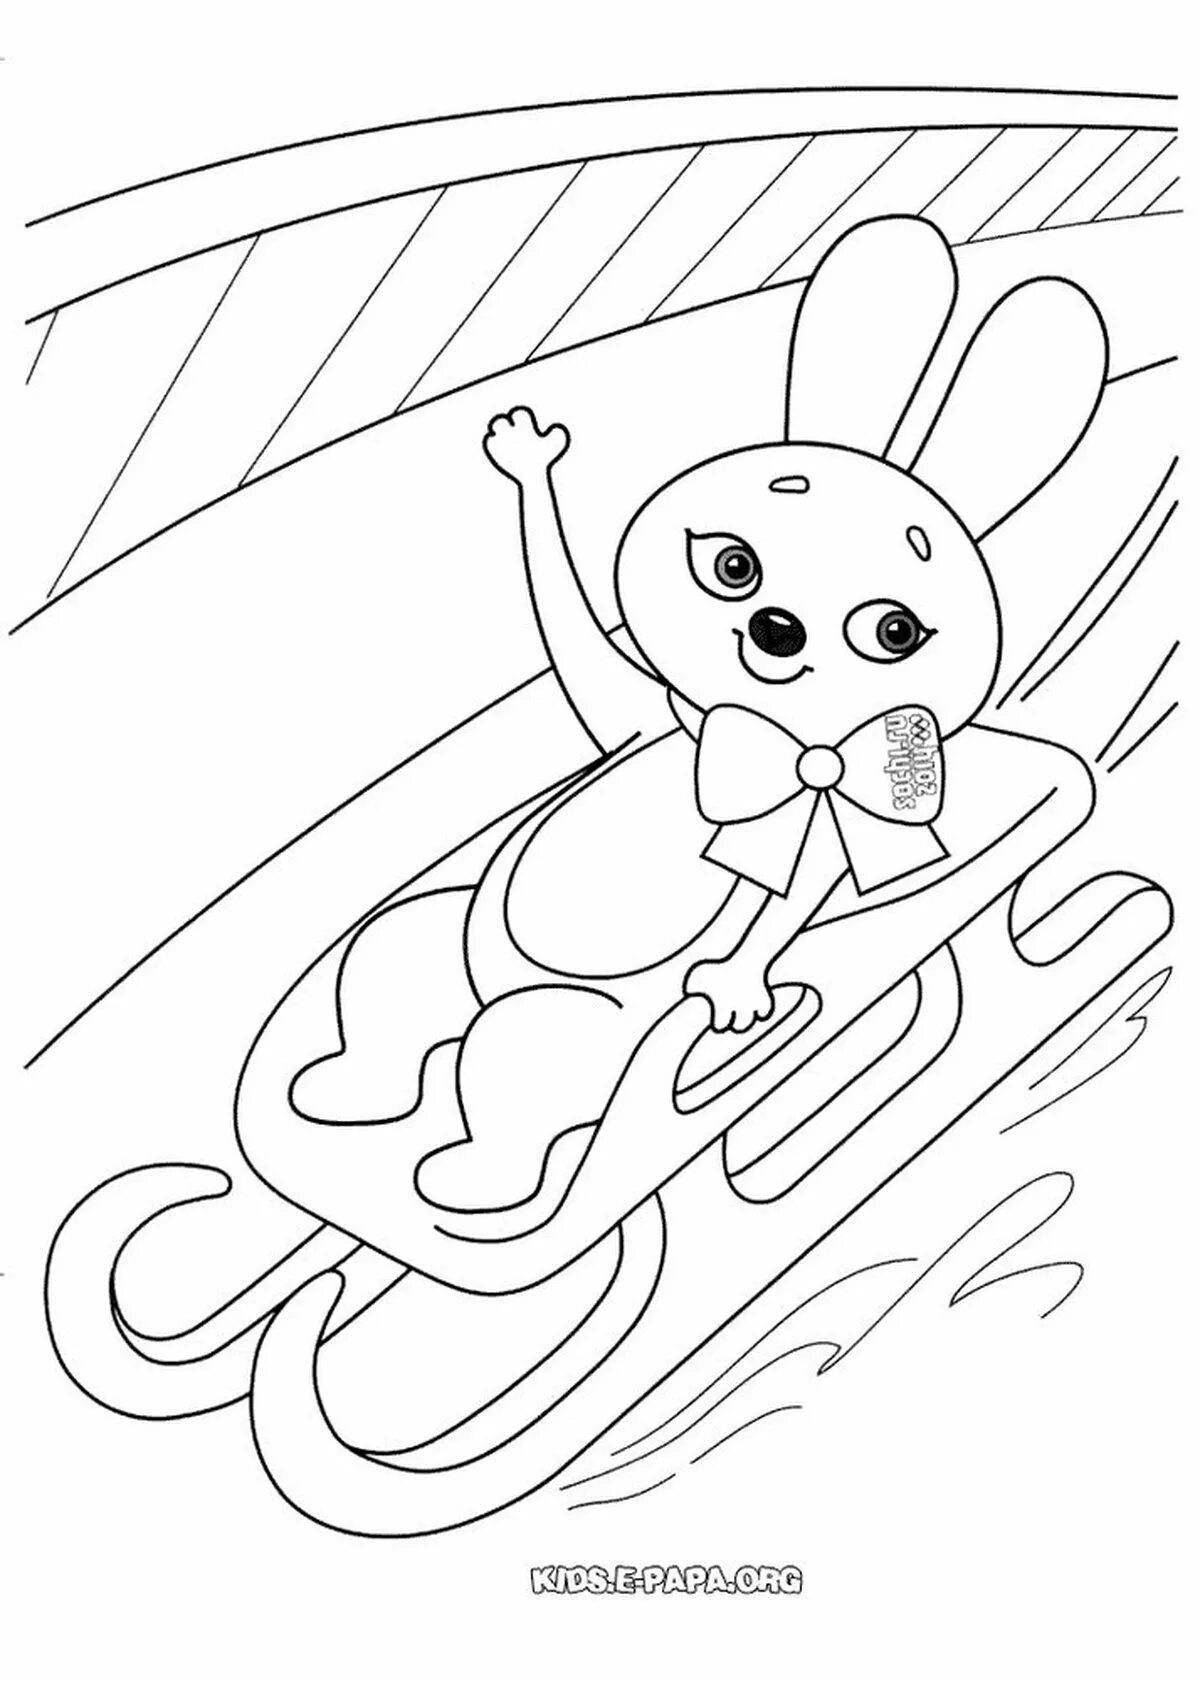 Wonderful coloring book for kids winter sports